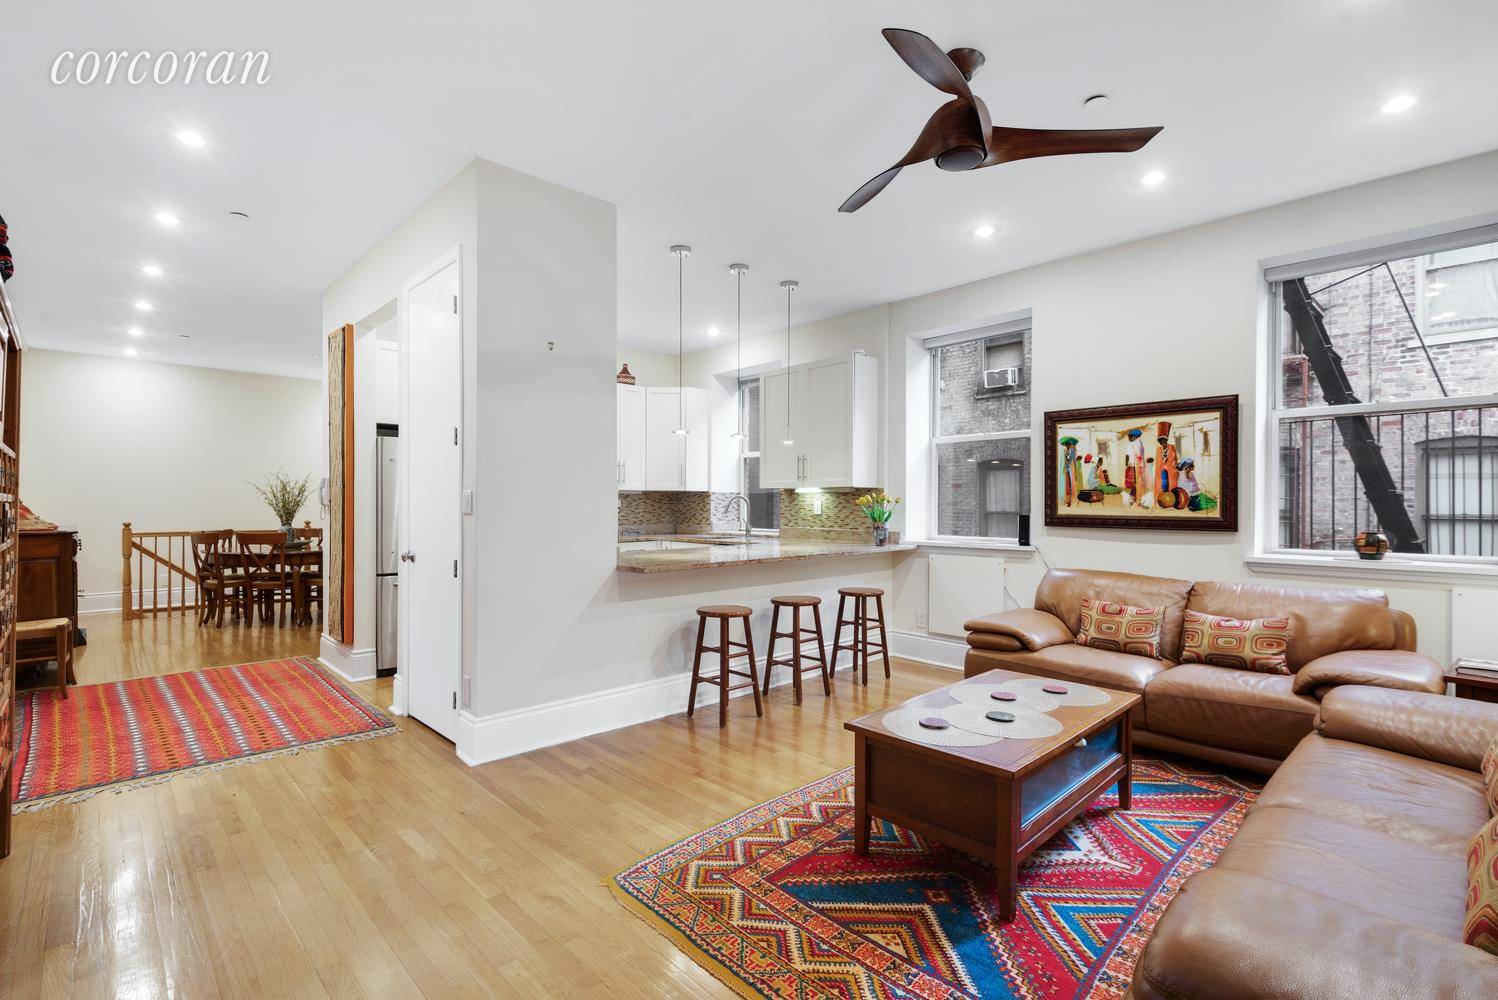 LEASES SIGNED APPLICATION PENDING Welcome home to a beautiful 3 bedroom, 2 bathroom duplex condo with a private patio in the heart of Morningside Heights.